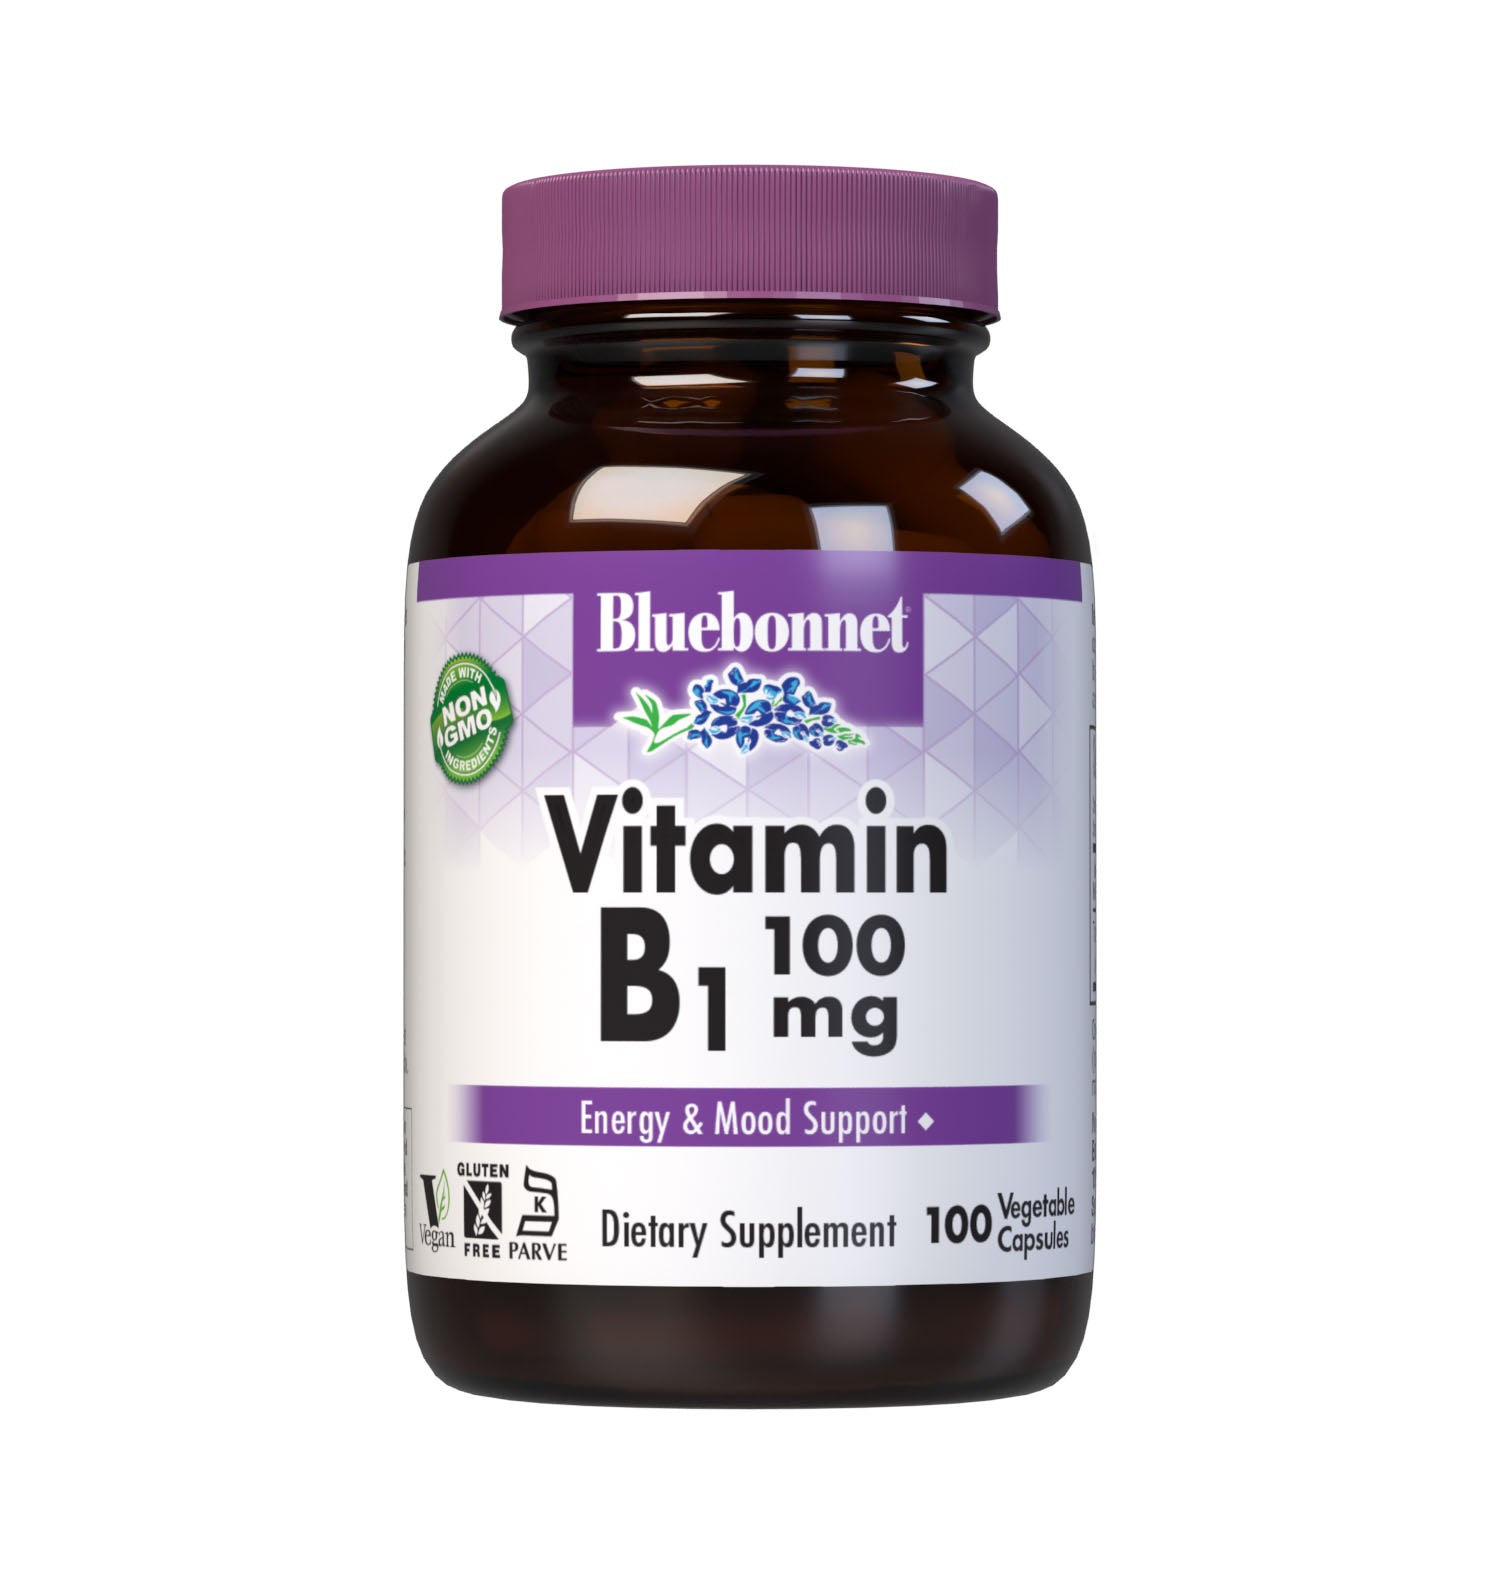 Bluebonnet’s Vitamin B1 100 mg Vegetable Capsules are formulated with crystalline vitamin B1 (thiamin HCI) which may support cellular energy production and mood health. #size_100 count